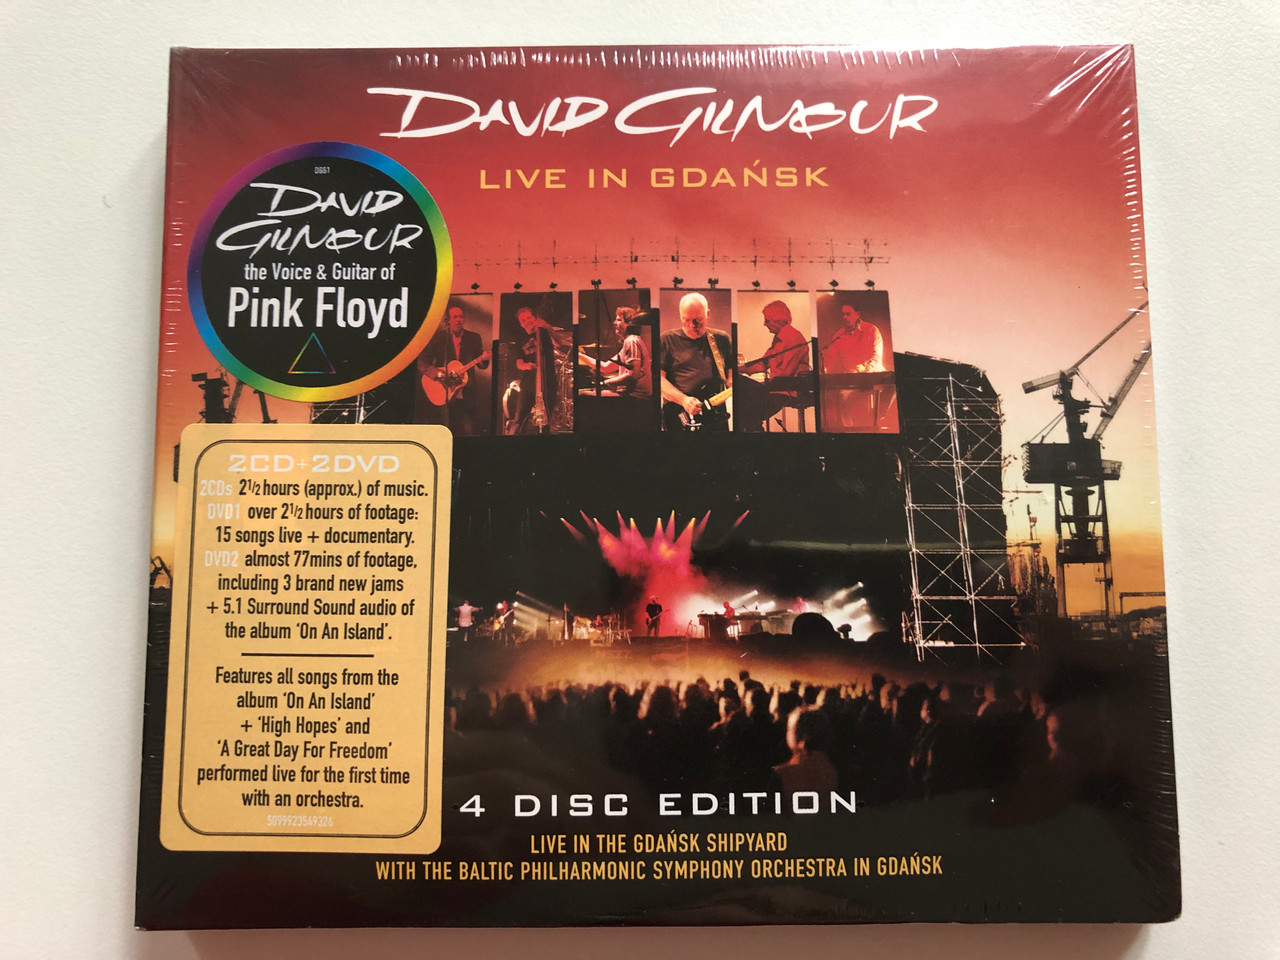 https://cdn10.bigcommerce.com/s-62bdpkt7pb/products/0/images/207970/David_Gilmour_Live_In_Gdask_4_Disc_Edition_Live_In_The_Gdask_Shipyard_With_The_Baltic_Philharmonic_Symphony_Orchestra_in_Gdask_EMI_2x_Audio_CD_2x_DVD_CD_2008_50999_235493_2_6_1__43593.1642580139.1280.1280.JPG?c=2&_gl=1*1w4i3ks*_ga*MjA2NTIxMjE2MC4xNTkwNTEyNTMy*_ga_WS2VZYPC6G*MTY0MjU2ODQxNC4yNjYuMS4xNjQyNTgwMTM0LjYw